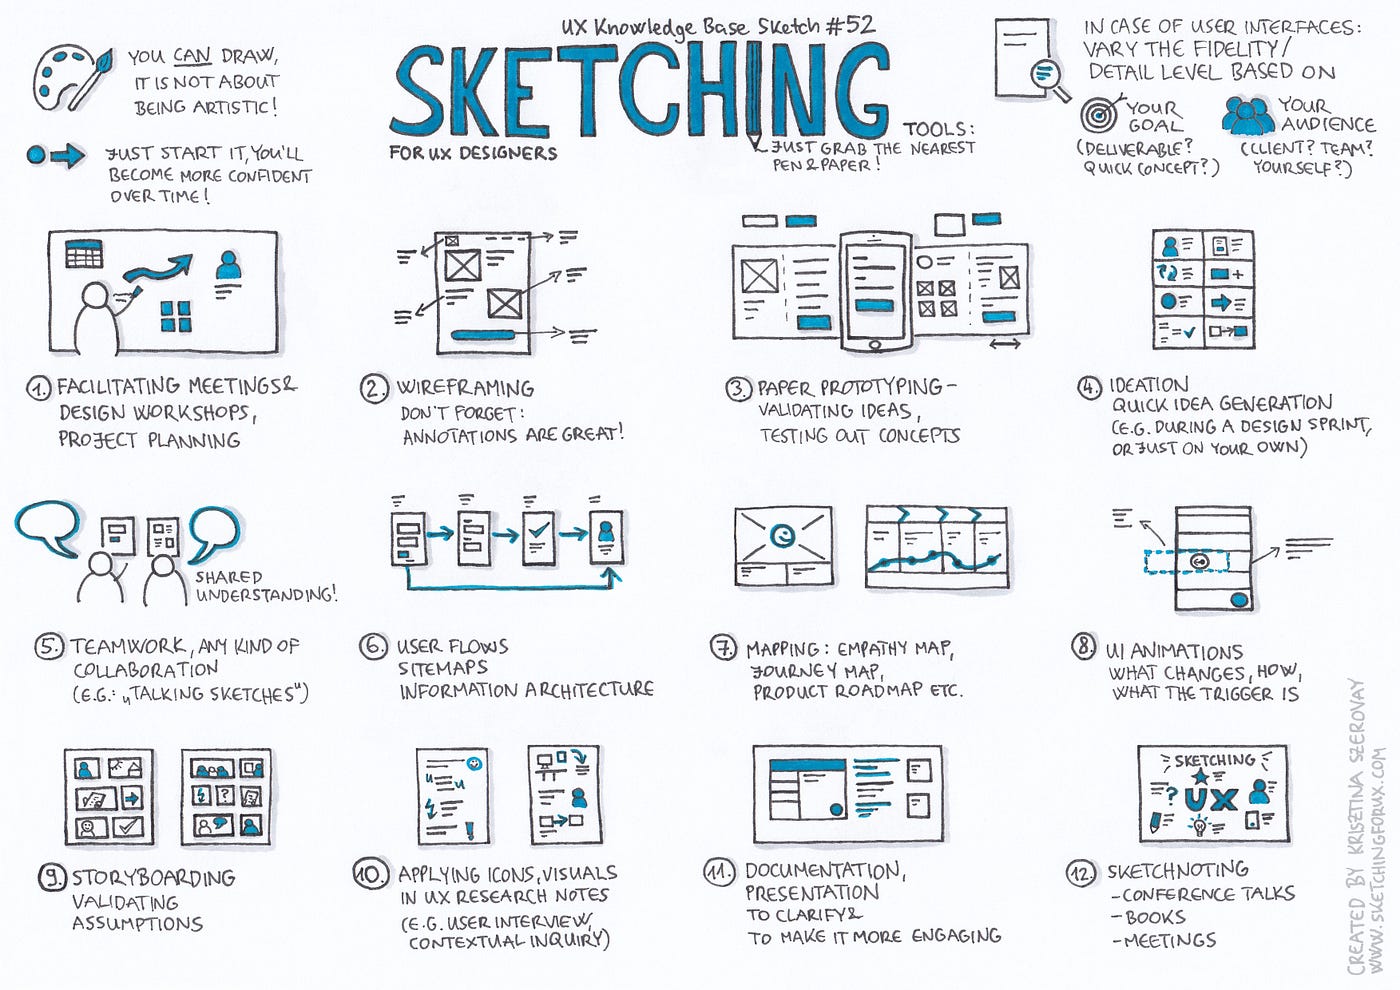 Sketching. How to use sketching in your design… | by Krisztina Szerovay |  UX Knowledge Base Sketch